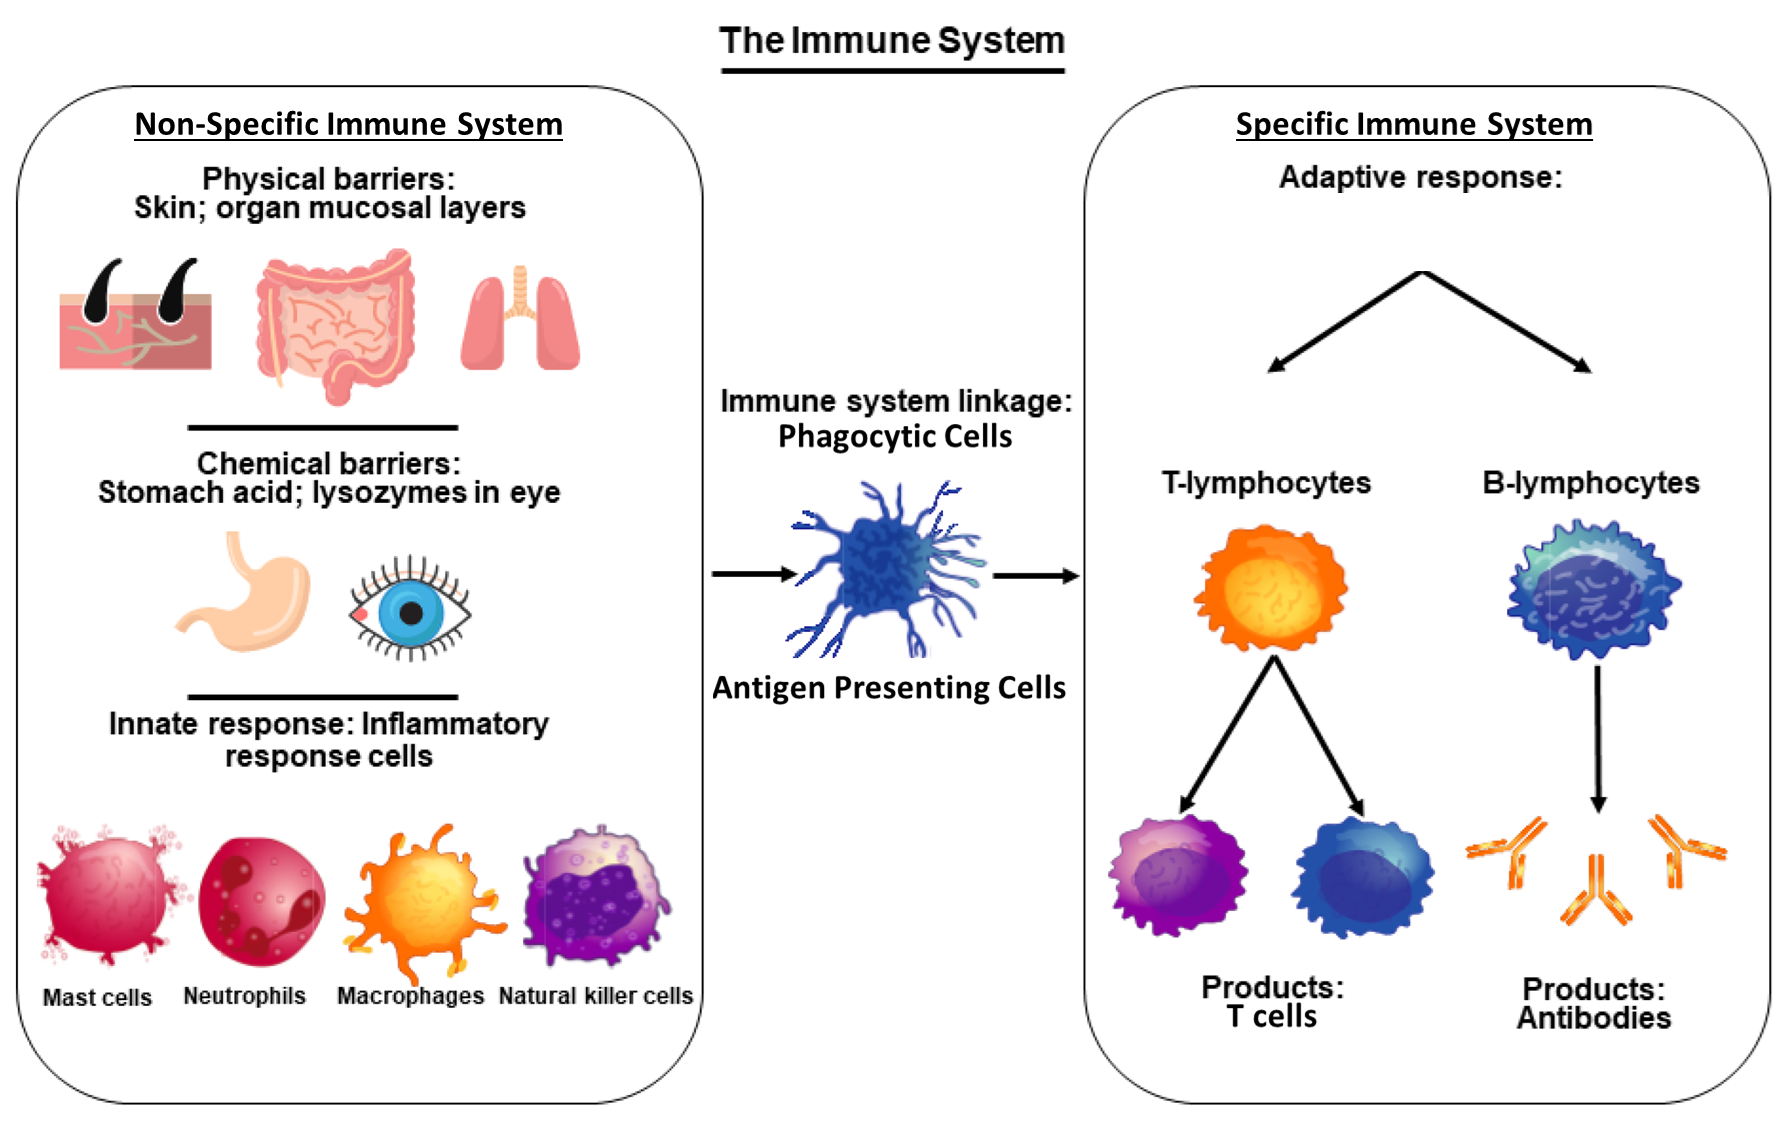 image of the non-specific and specific immune systems, connected by immune system linkage